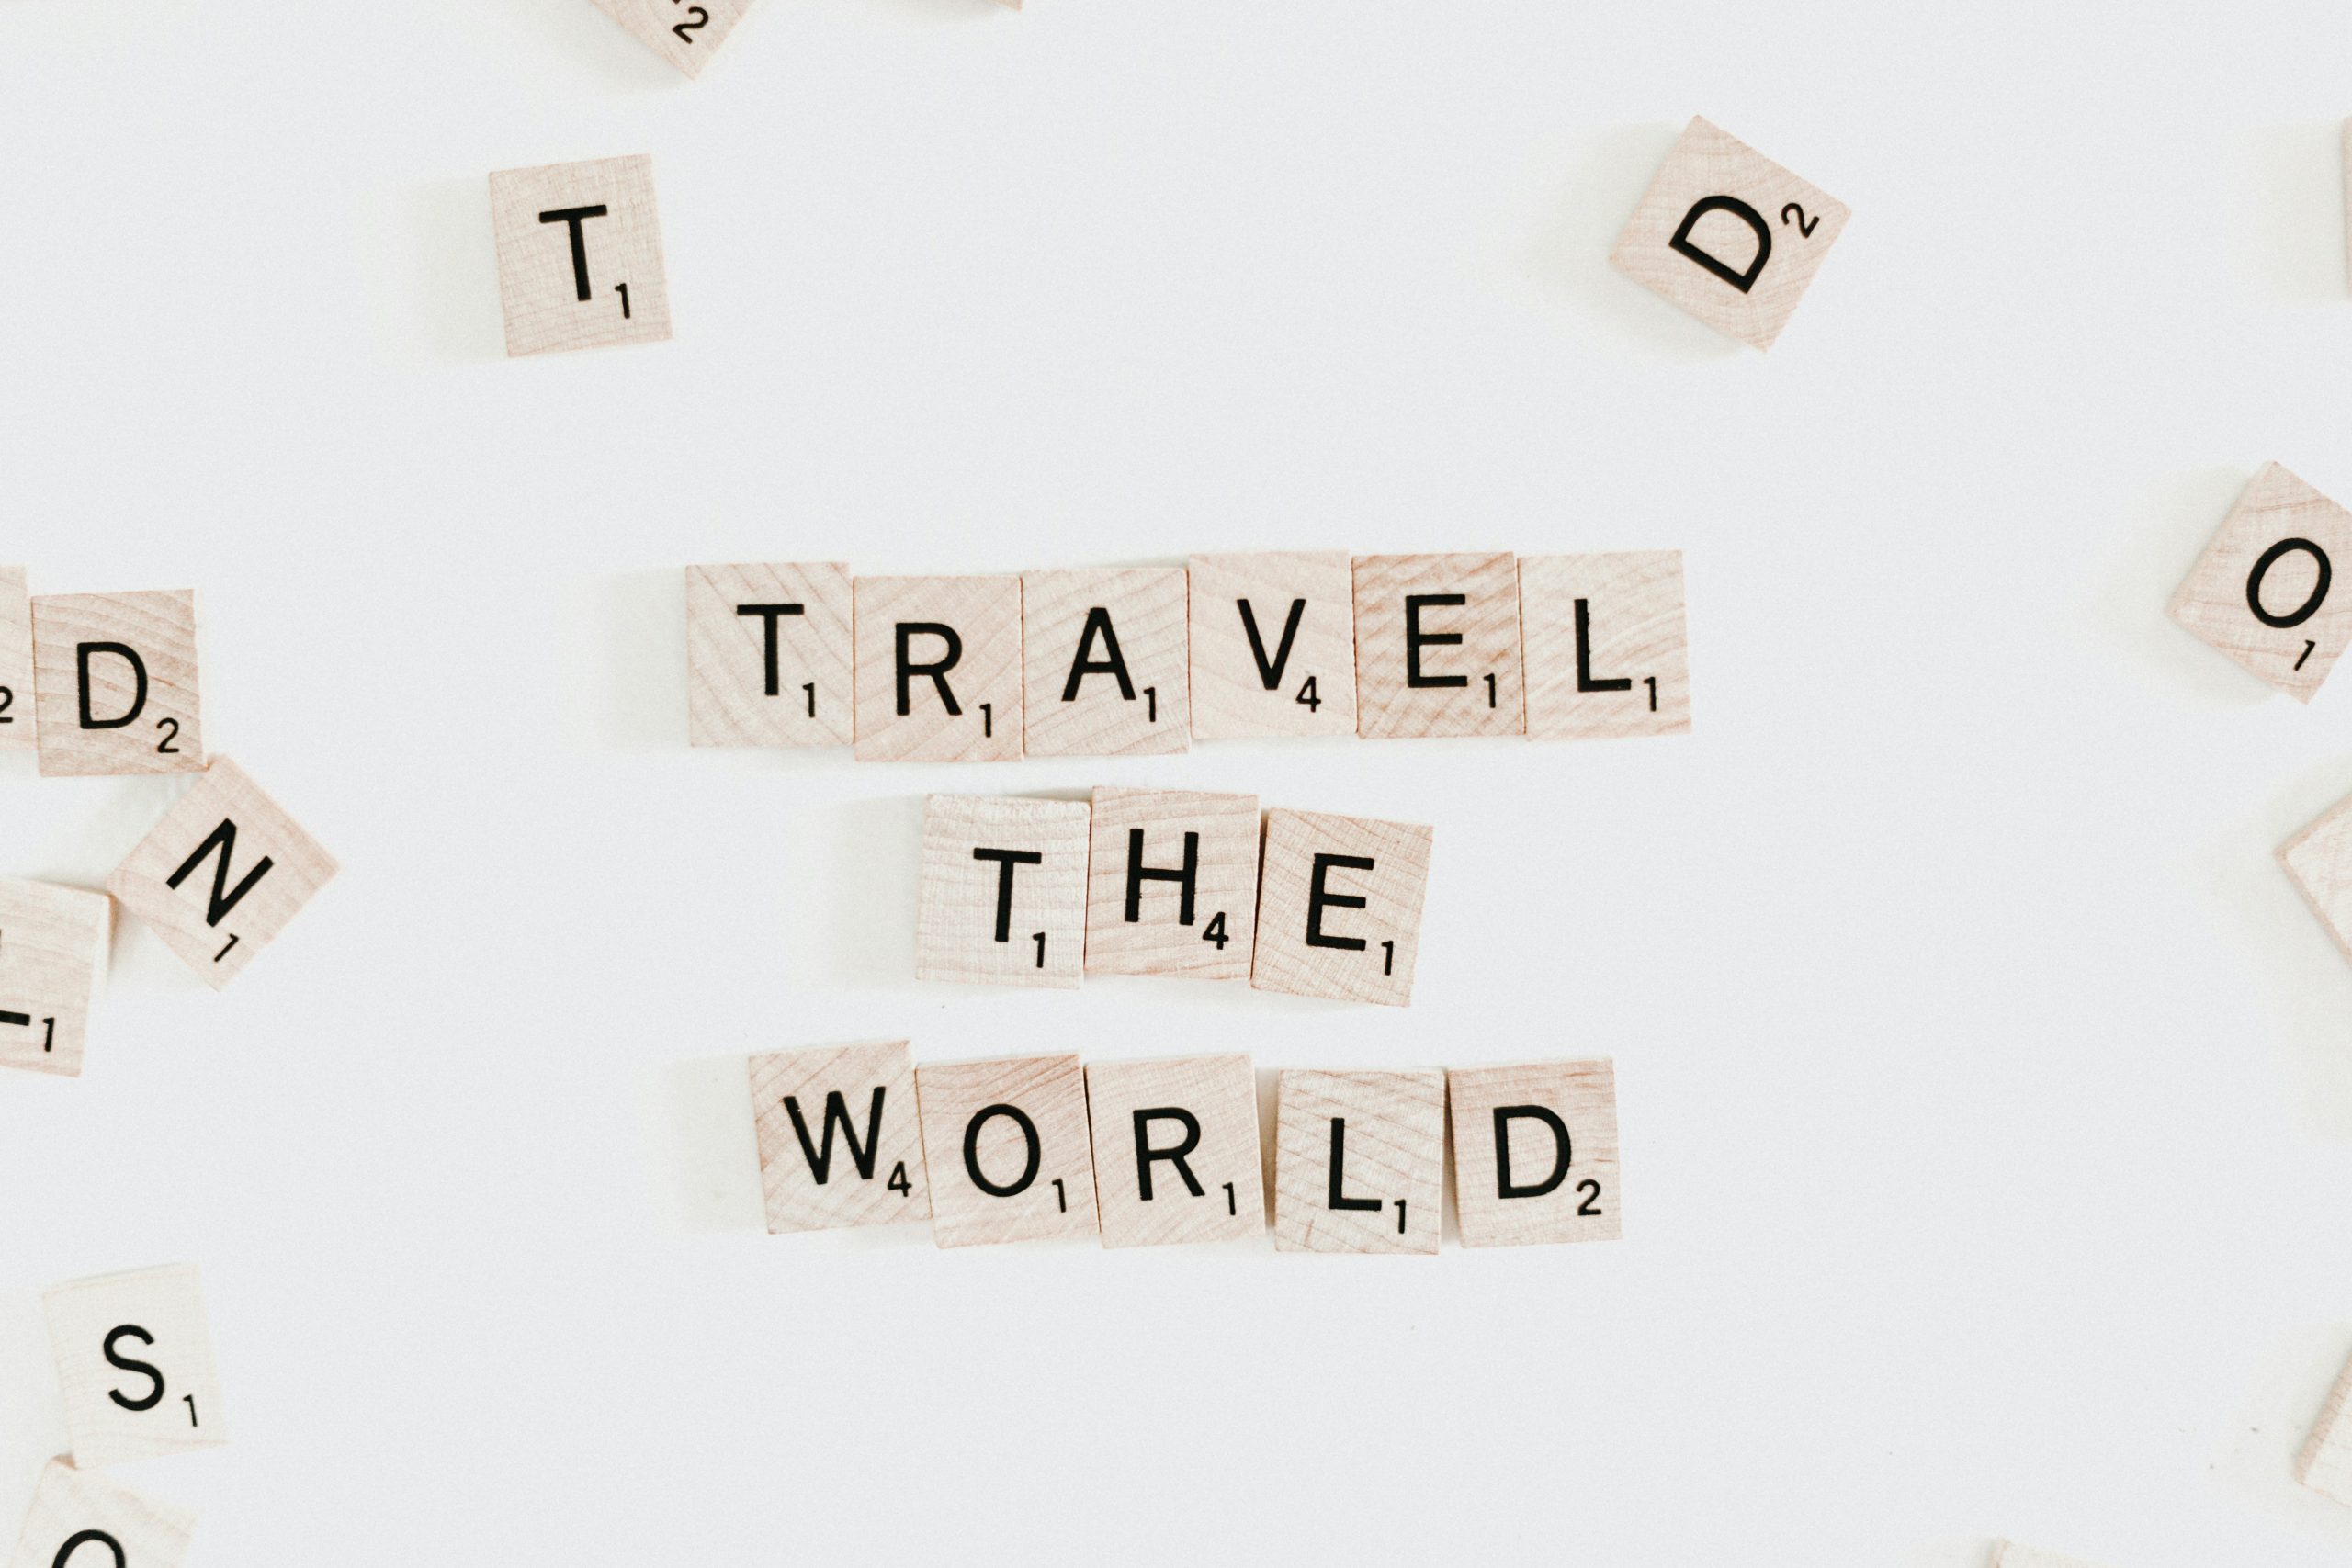 discover new travel destinations and get inspired with our travel inspiration. plan your next adventure and explore the world with our tips and recommendations.